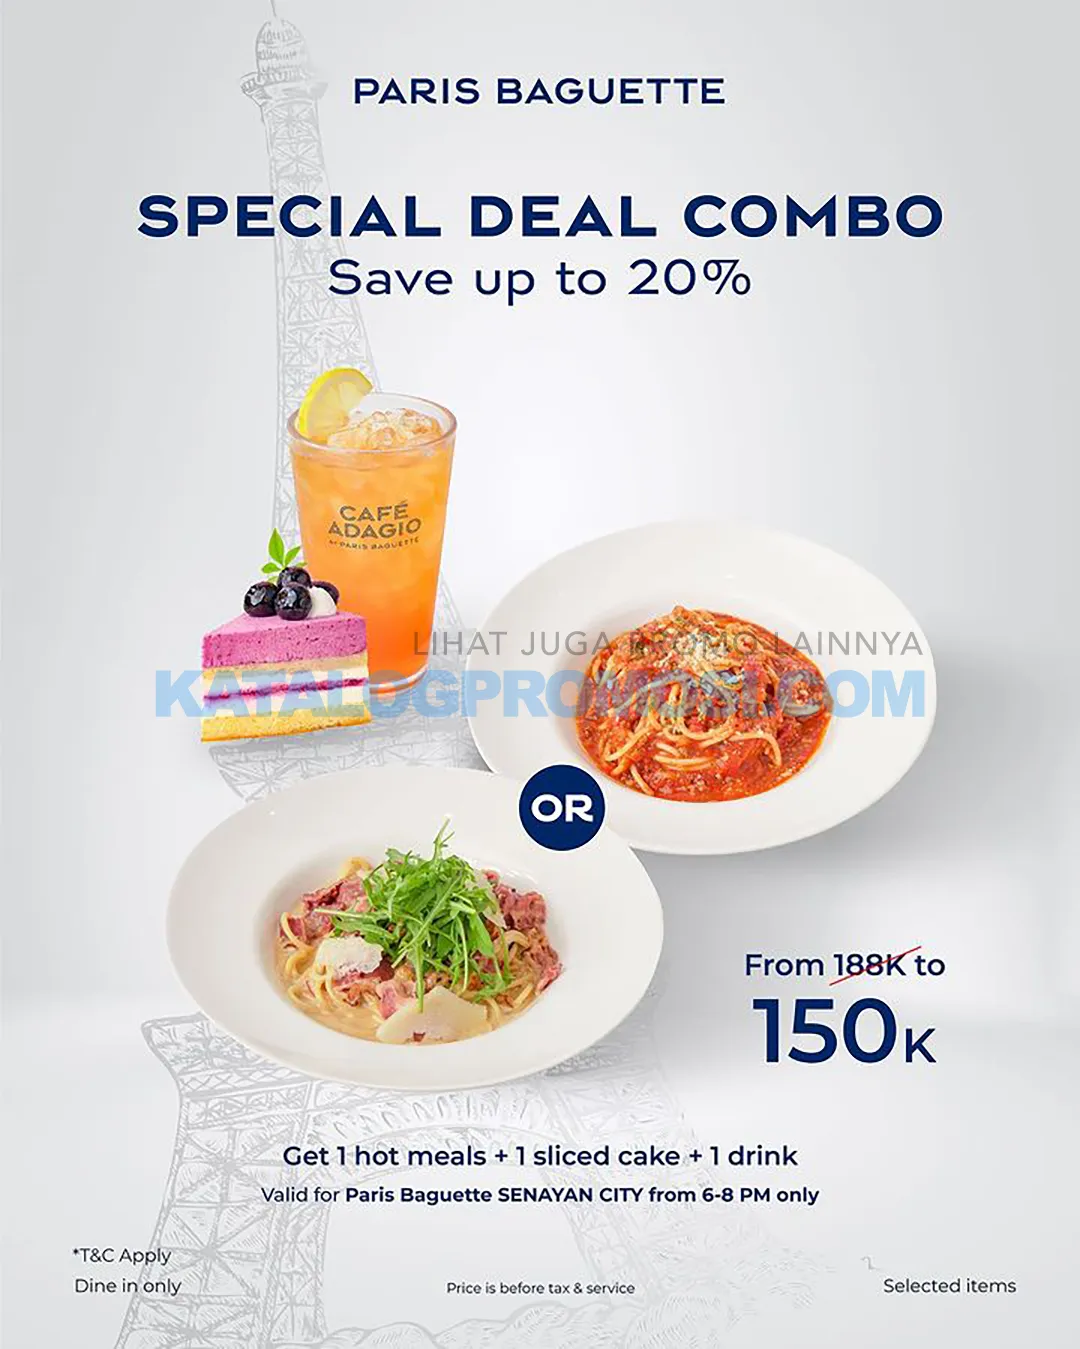 Promo Paris Baguette SPECIAL DEAL COMBO - SAVE up to 20% off